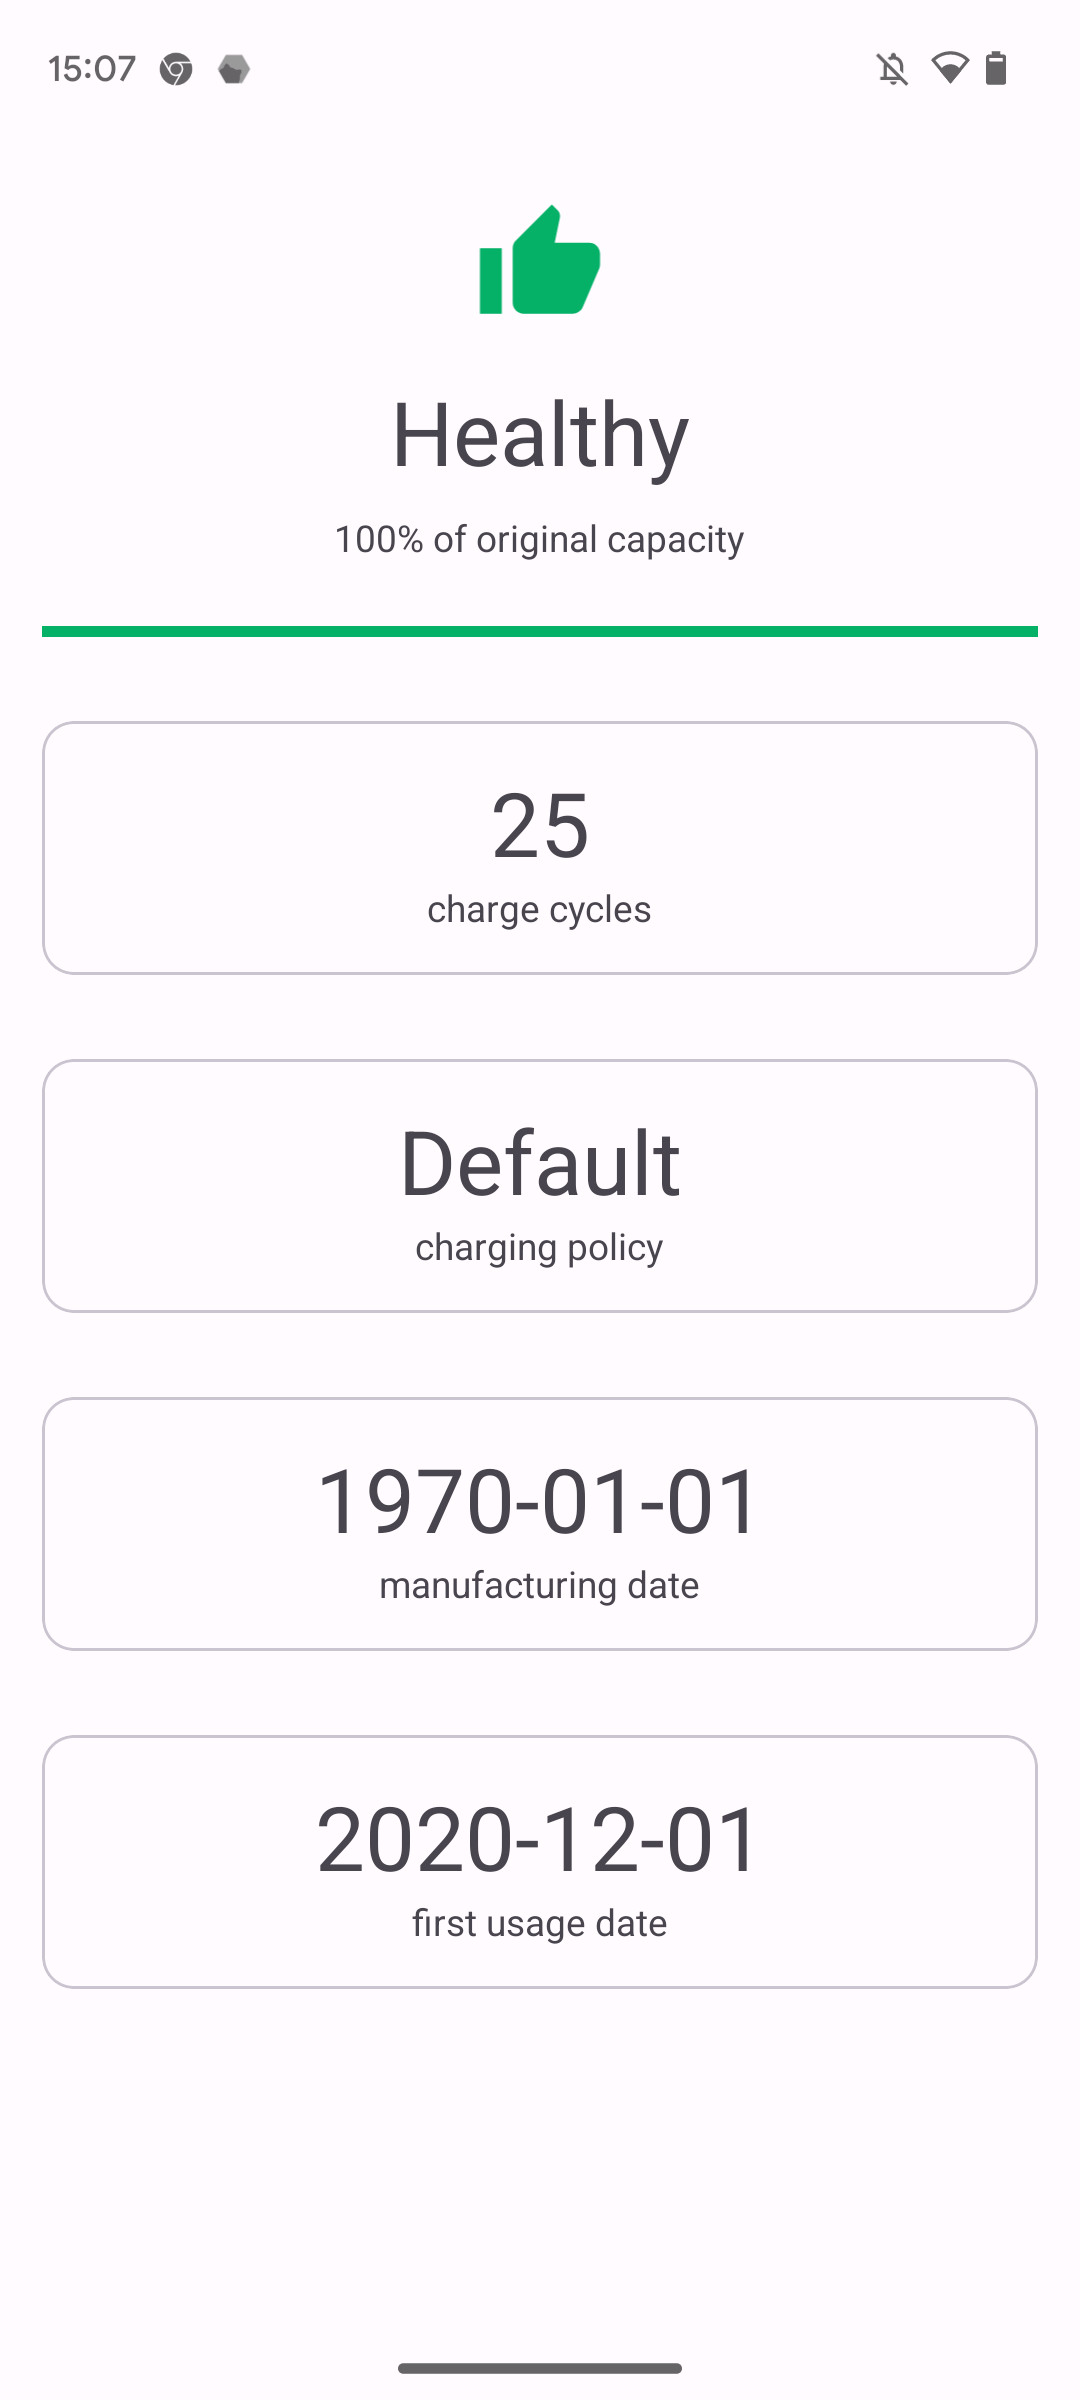 Screenshot of Batt showing incorrect manufacturing and first usage dates